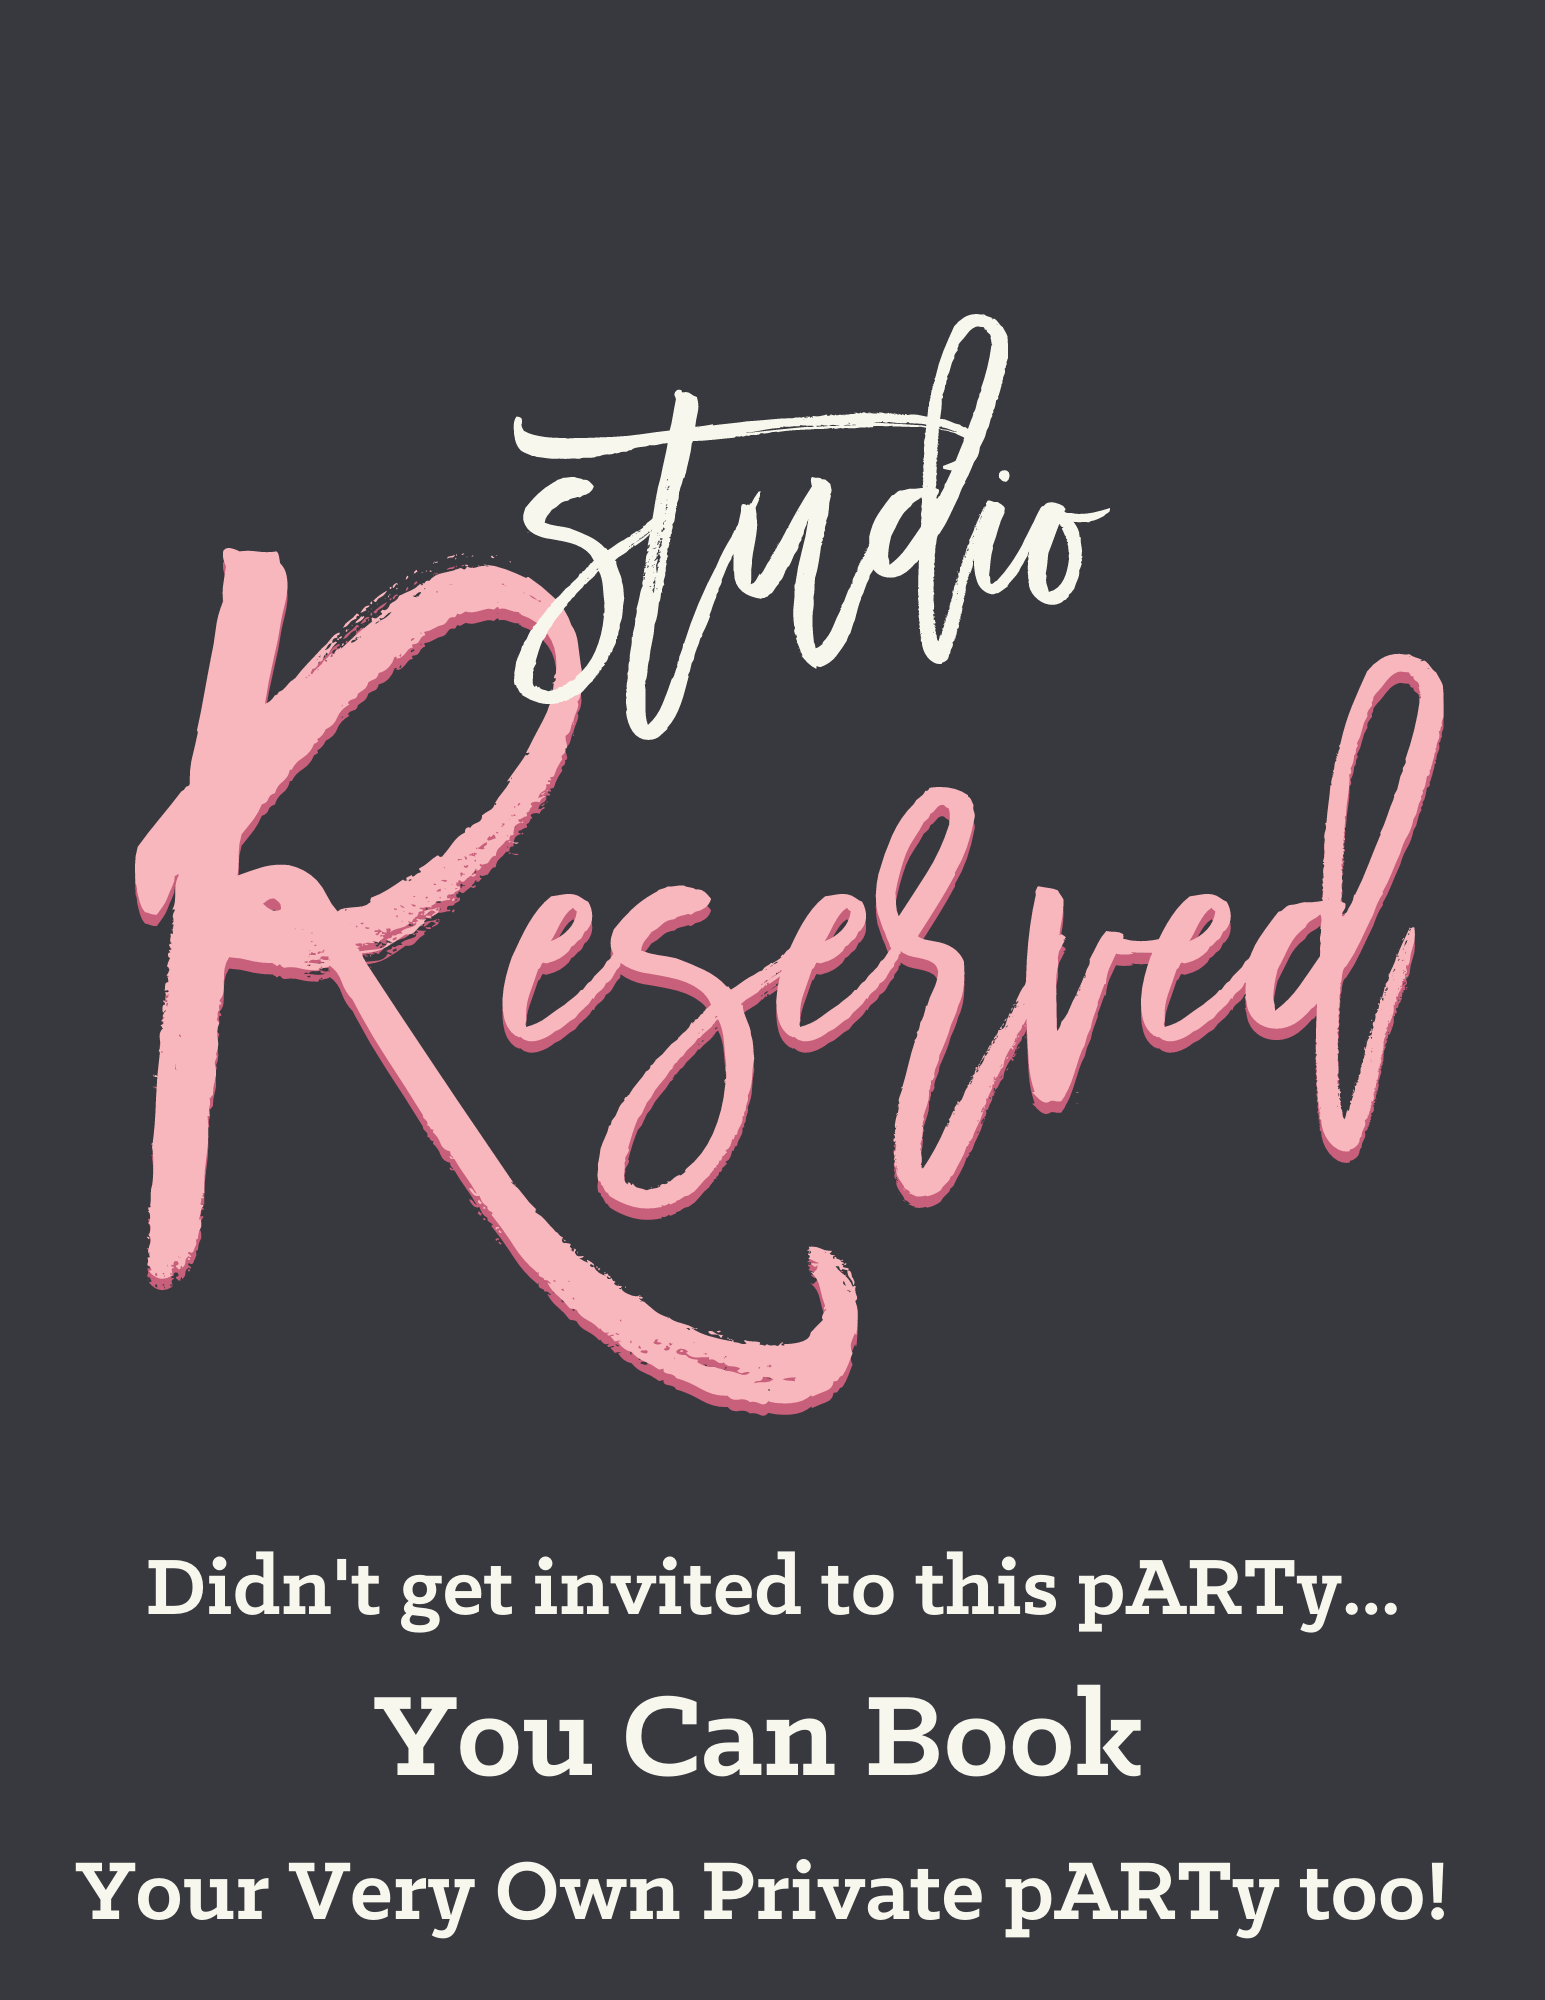 STUDIO RESERVED FOR PRIVATE EVENTS! Book your pARTy today!